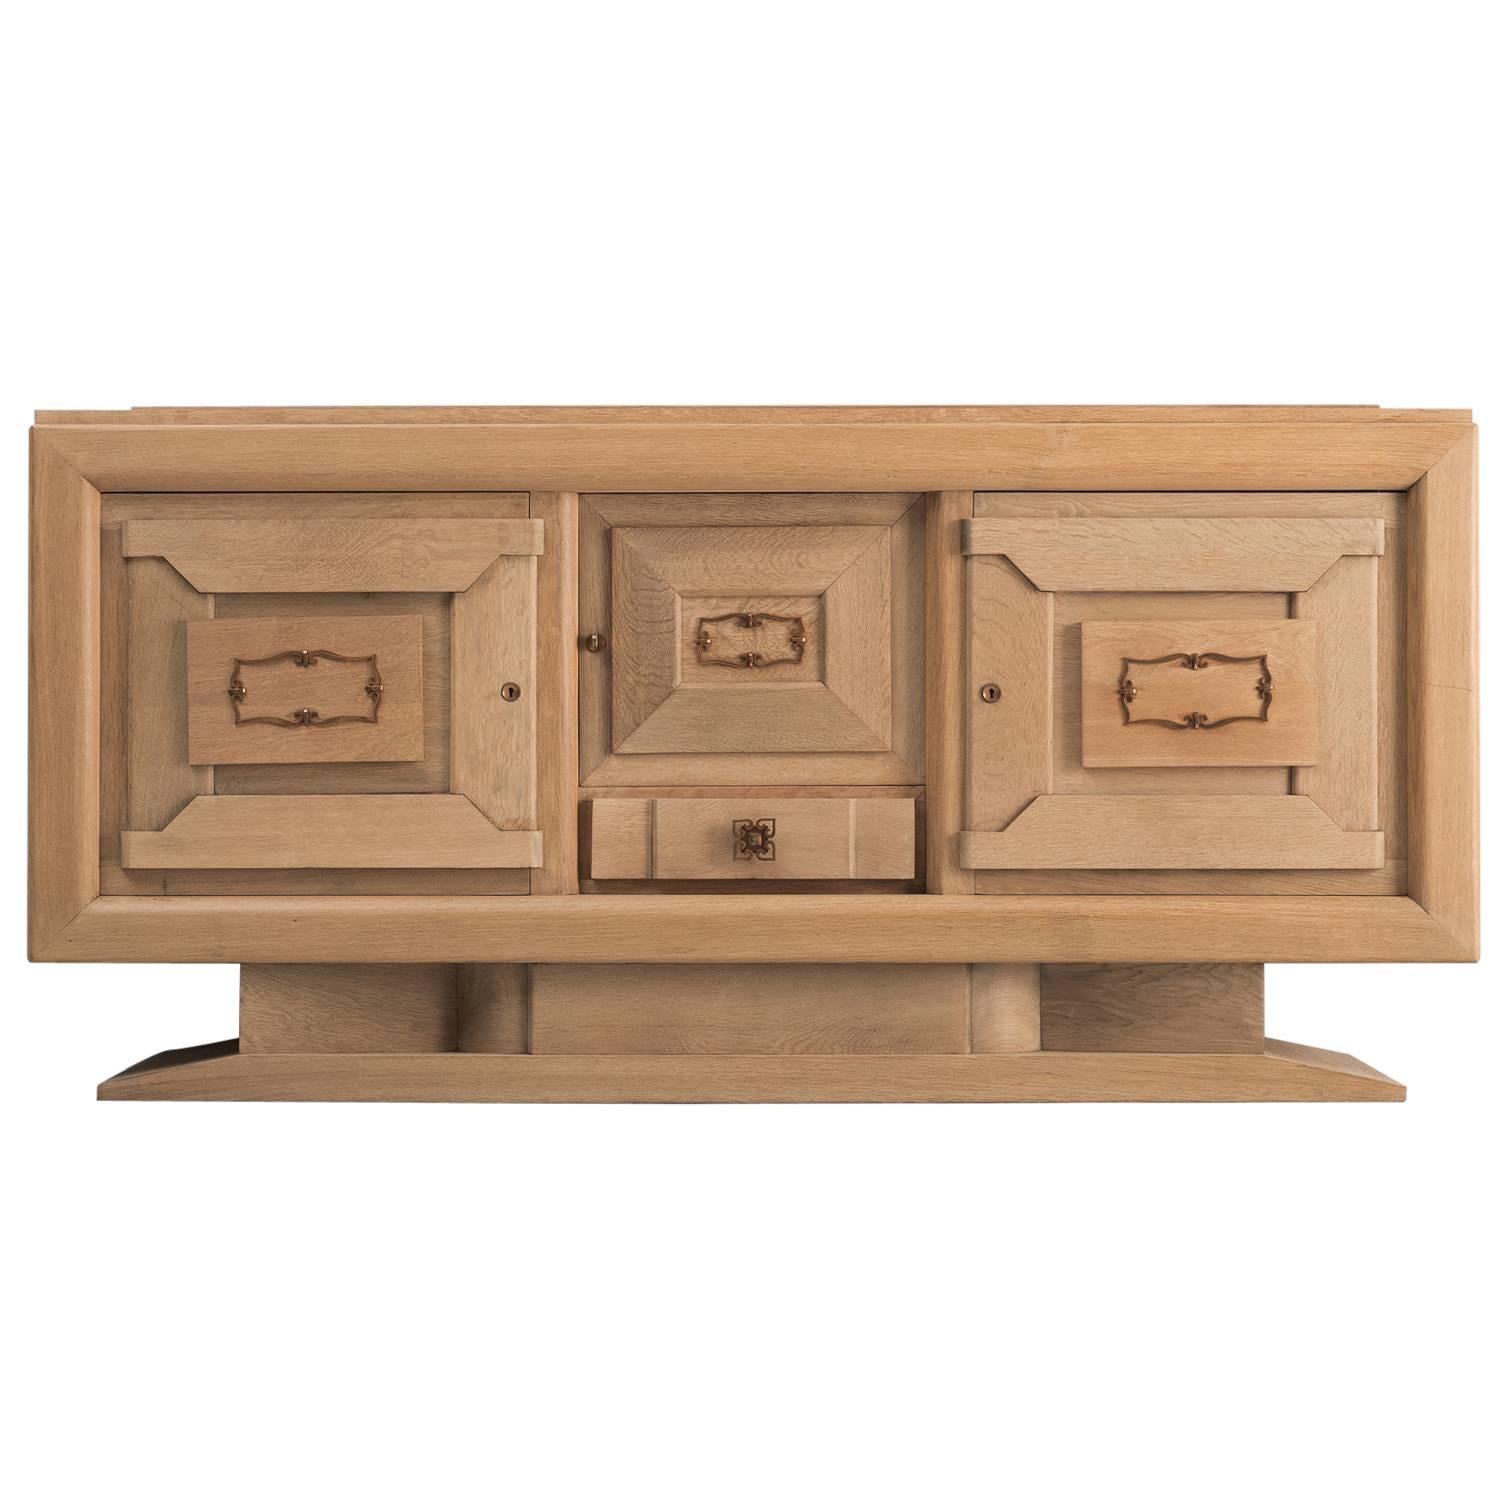 Charles Dudouyt Sideboard in Oak with Brass Elements